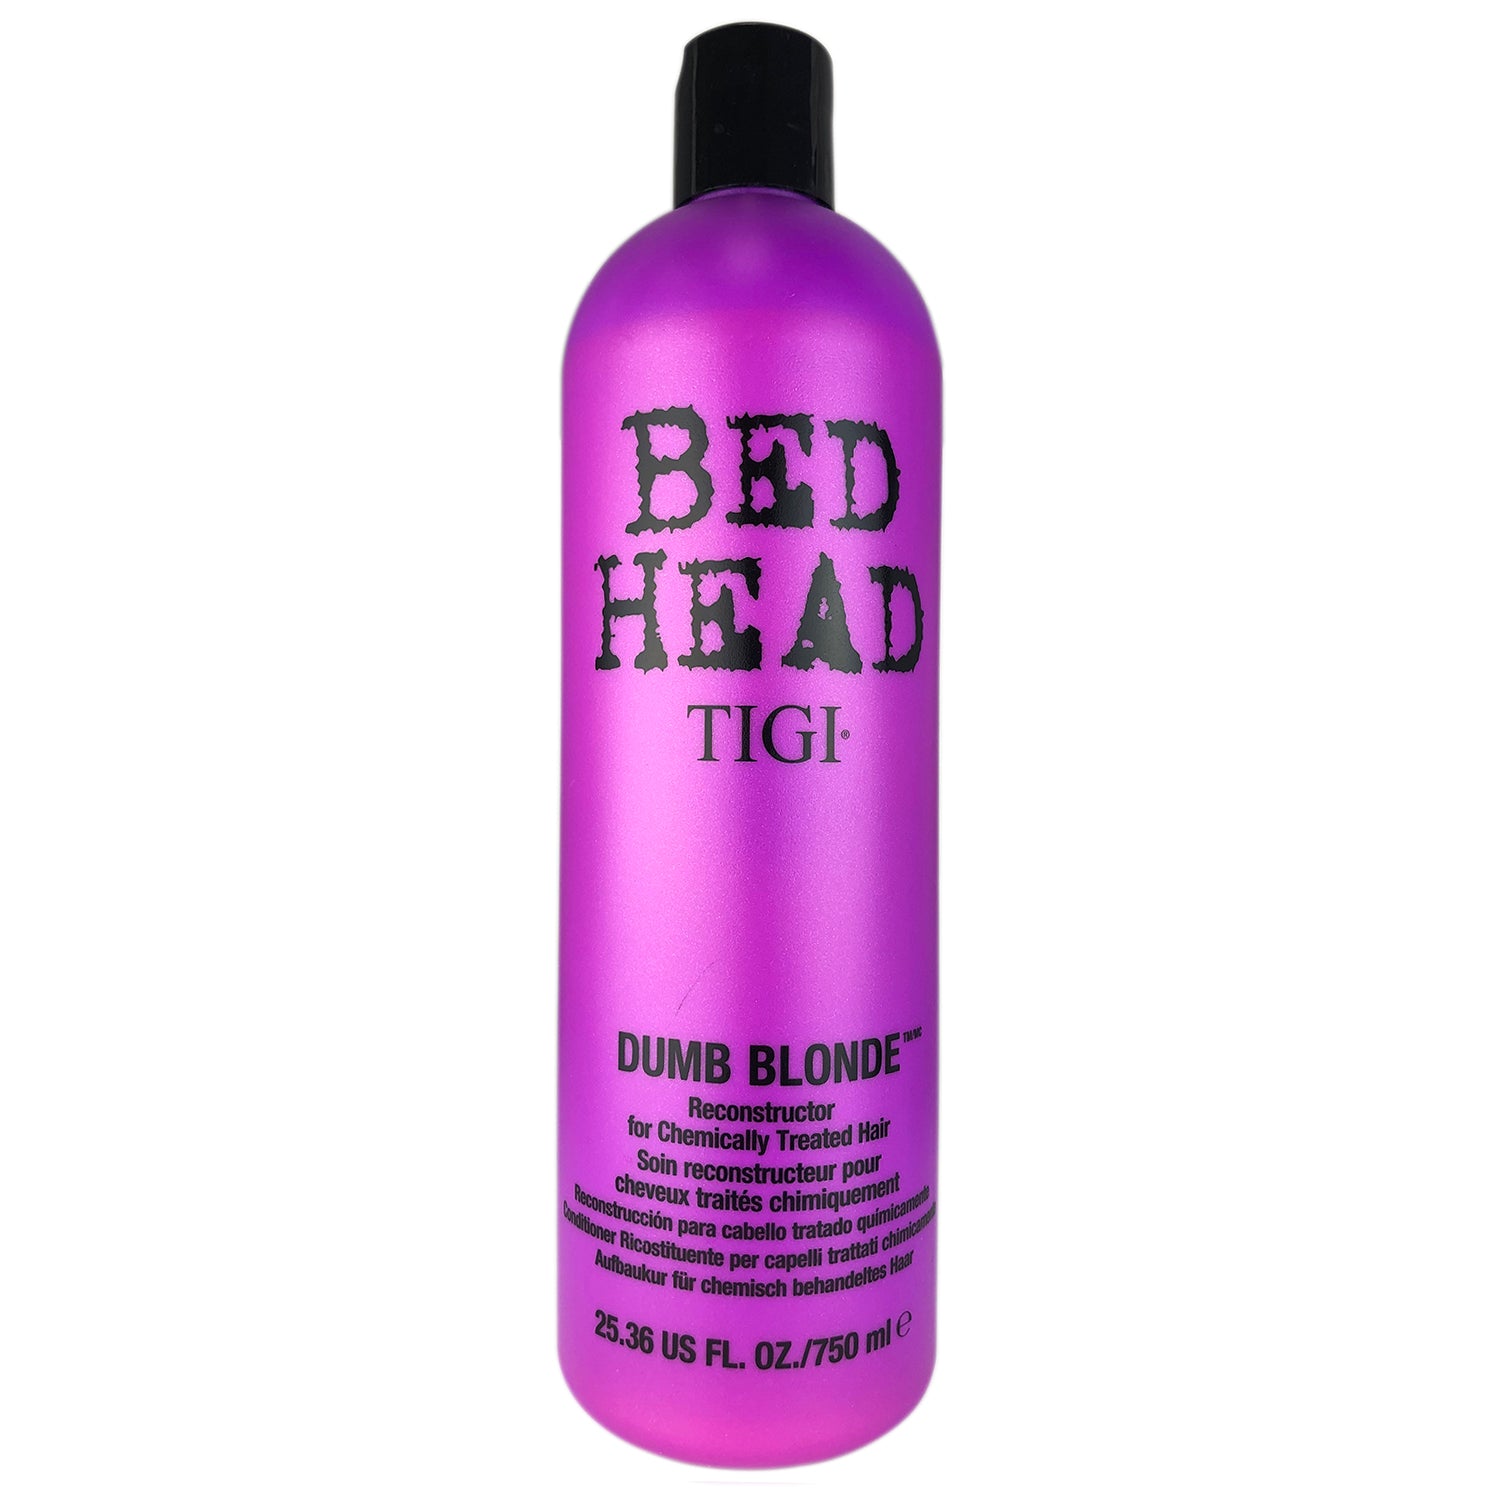 TIGI Bed Head Dumb Blond Reconstructor For Chemically Treated Hair 25.36 oz